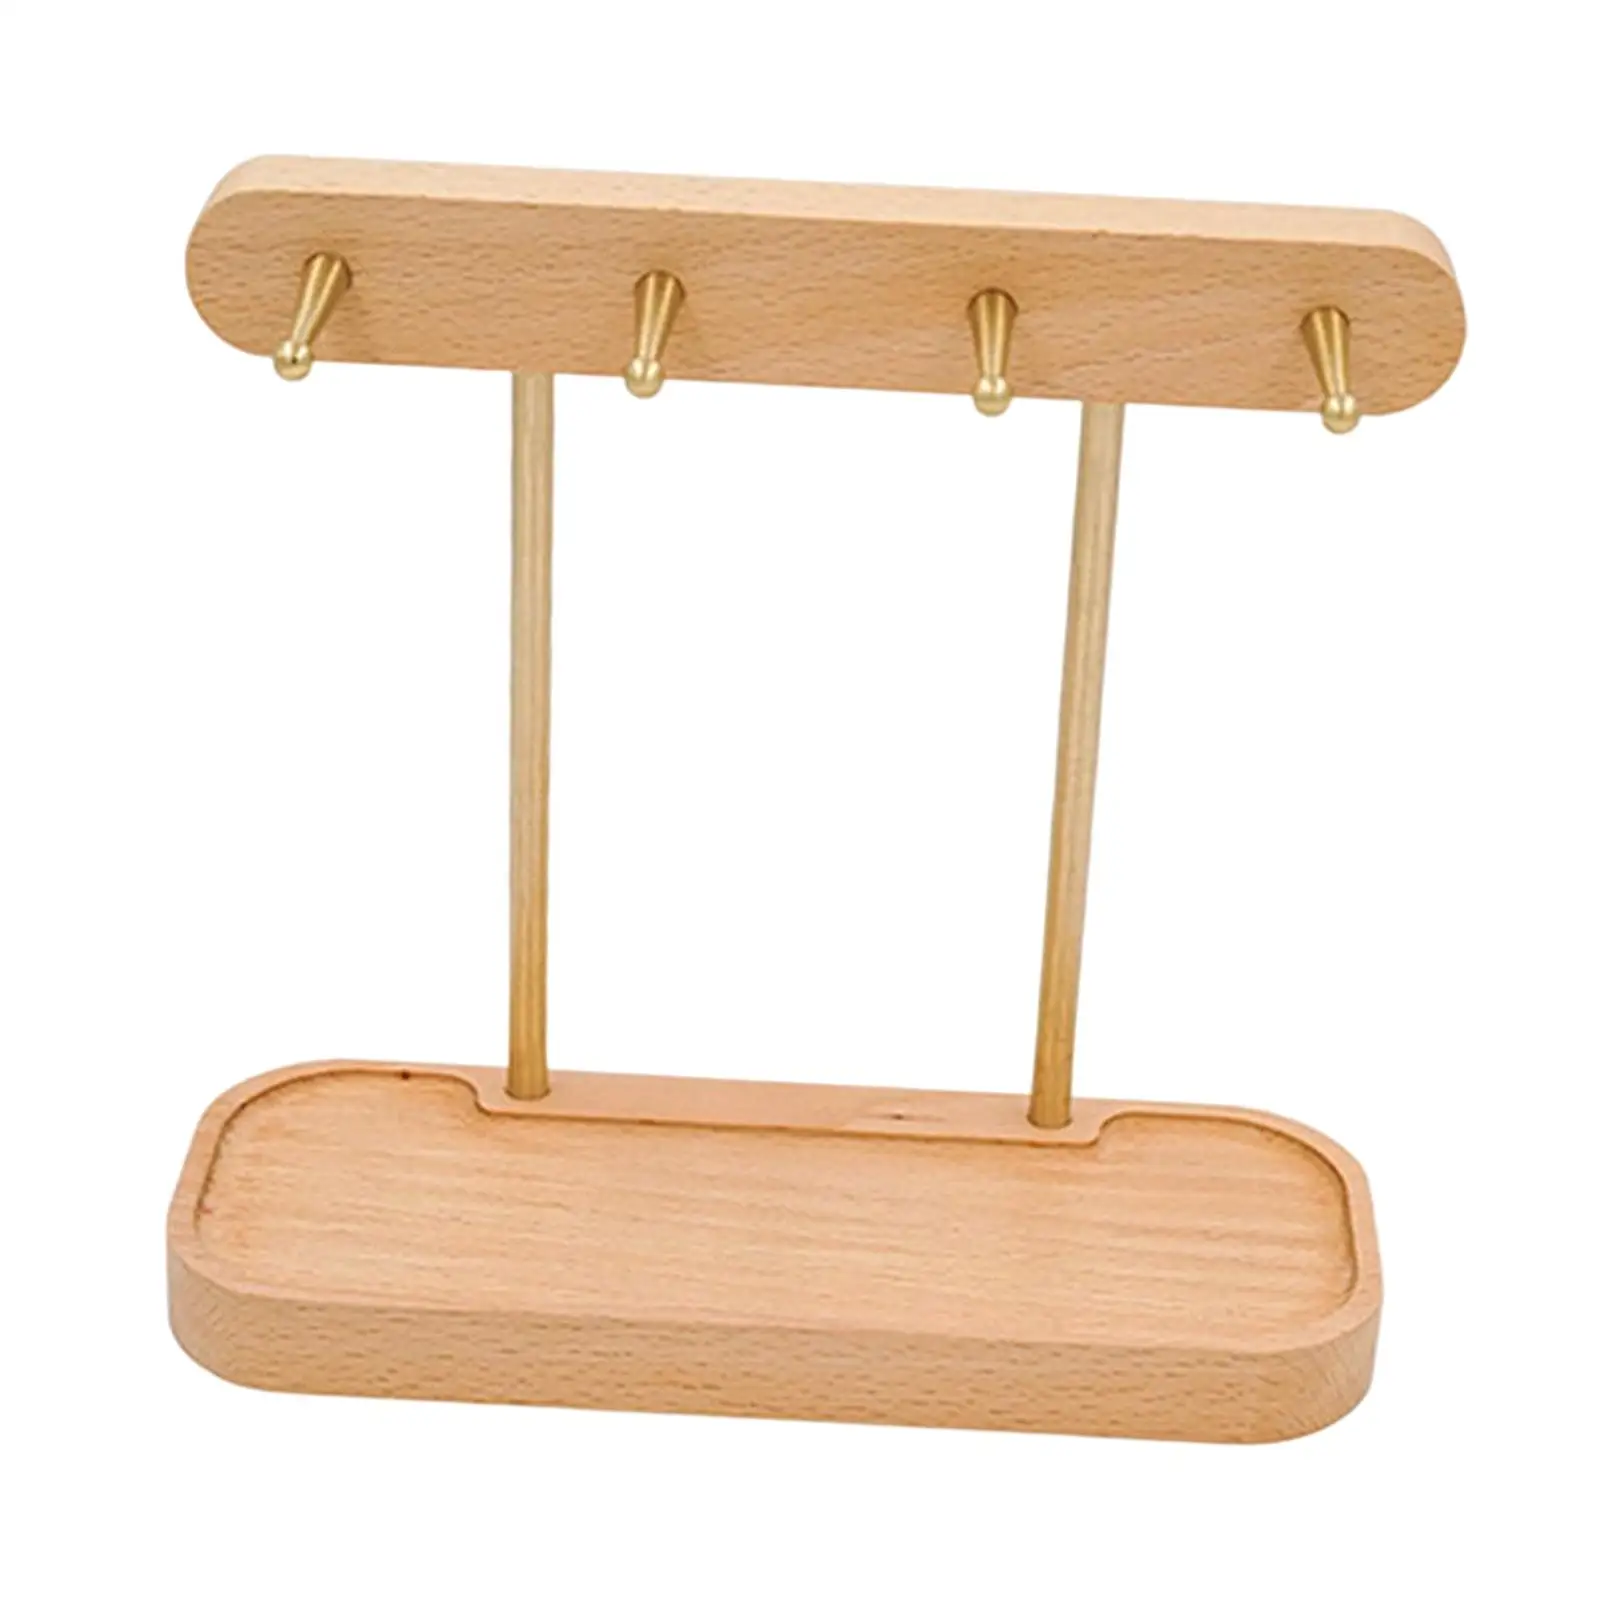 Wooden Desktop Key Holder Hook Organizer with 4 Hooks and Tray Storage Rack Creative Decorative for Home Entrance Decoration